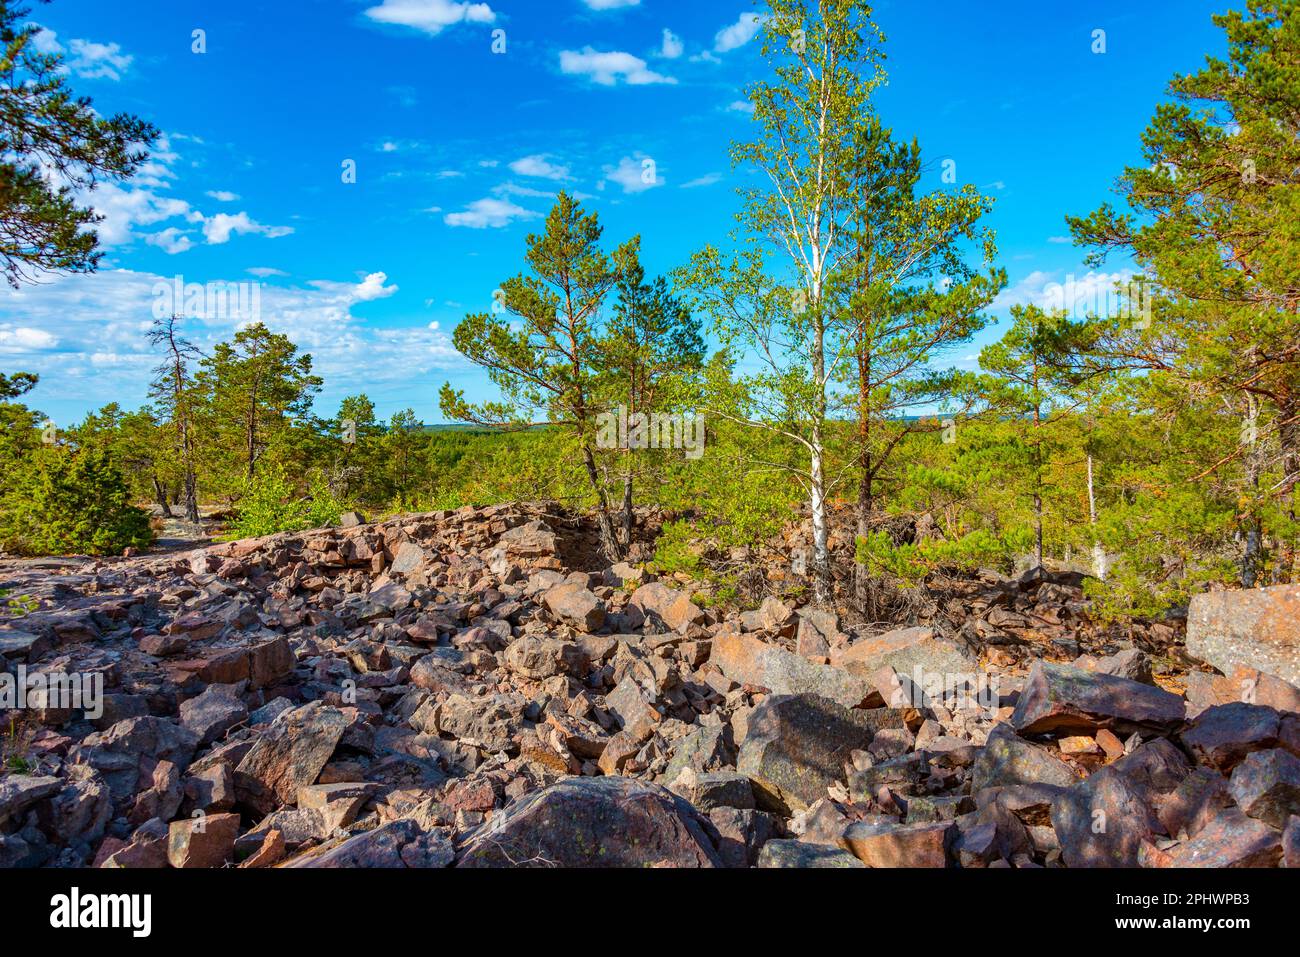 Salis Battery Hill at Aland islands in Finland. Stock Photo